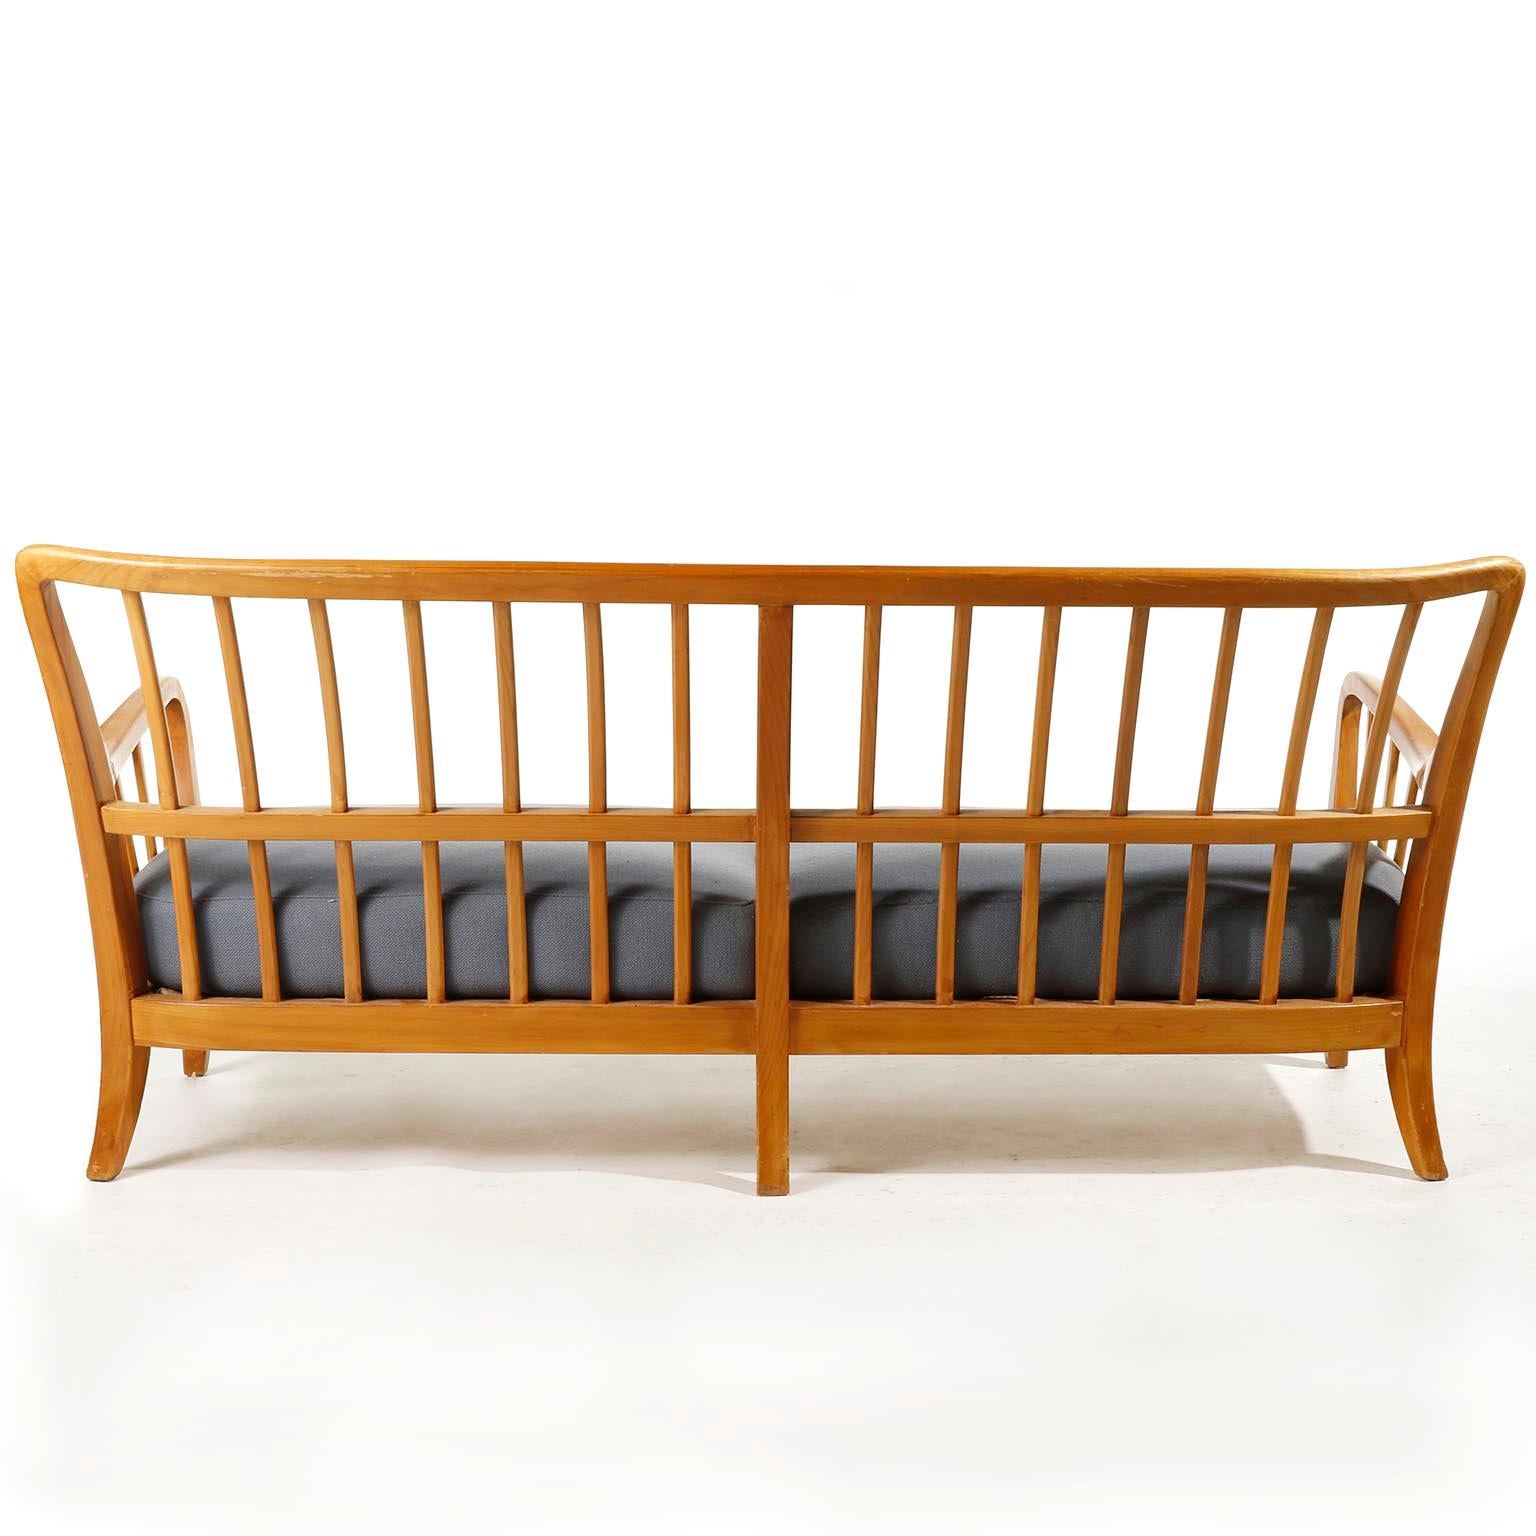 Bench Seette Seat by Thonet, Attributed to Josef Frank, Wood, 1940 For Sale 2